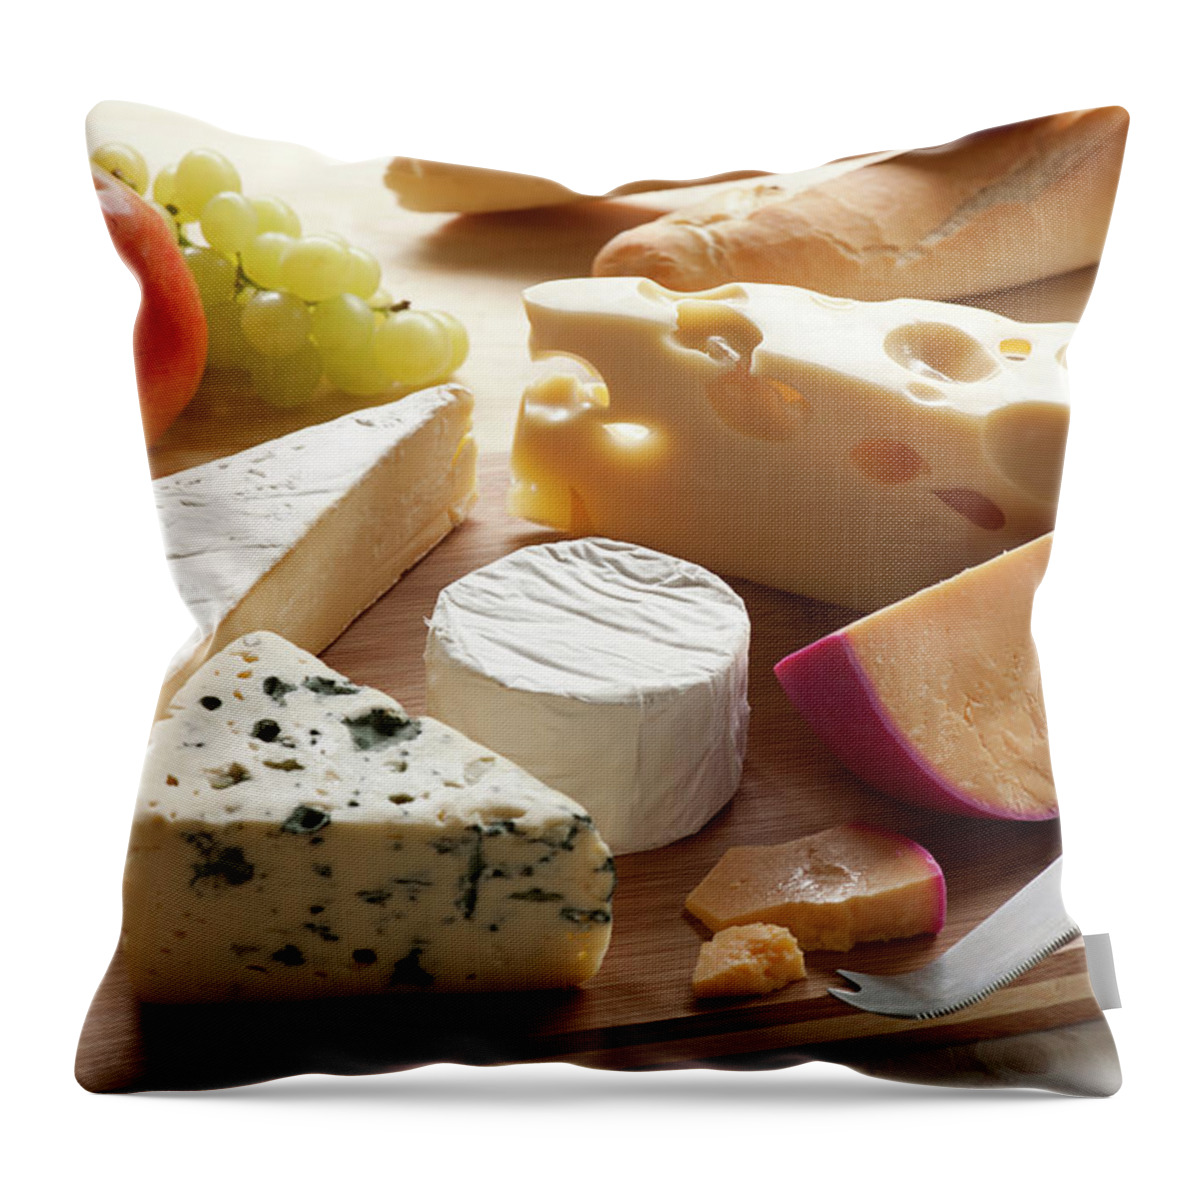 Cheese Throw Pillow featuring the photograph Cheese And Wine by Tinafields